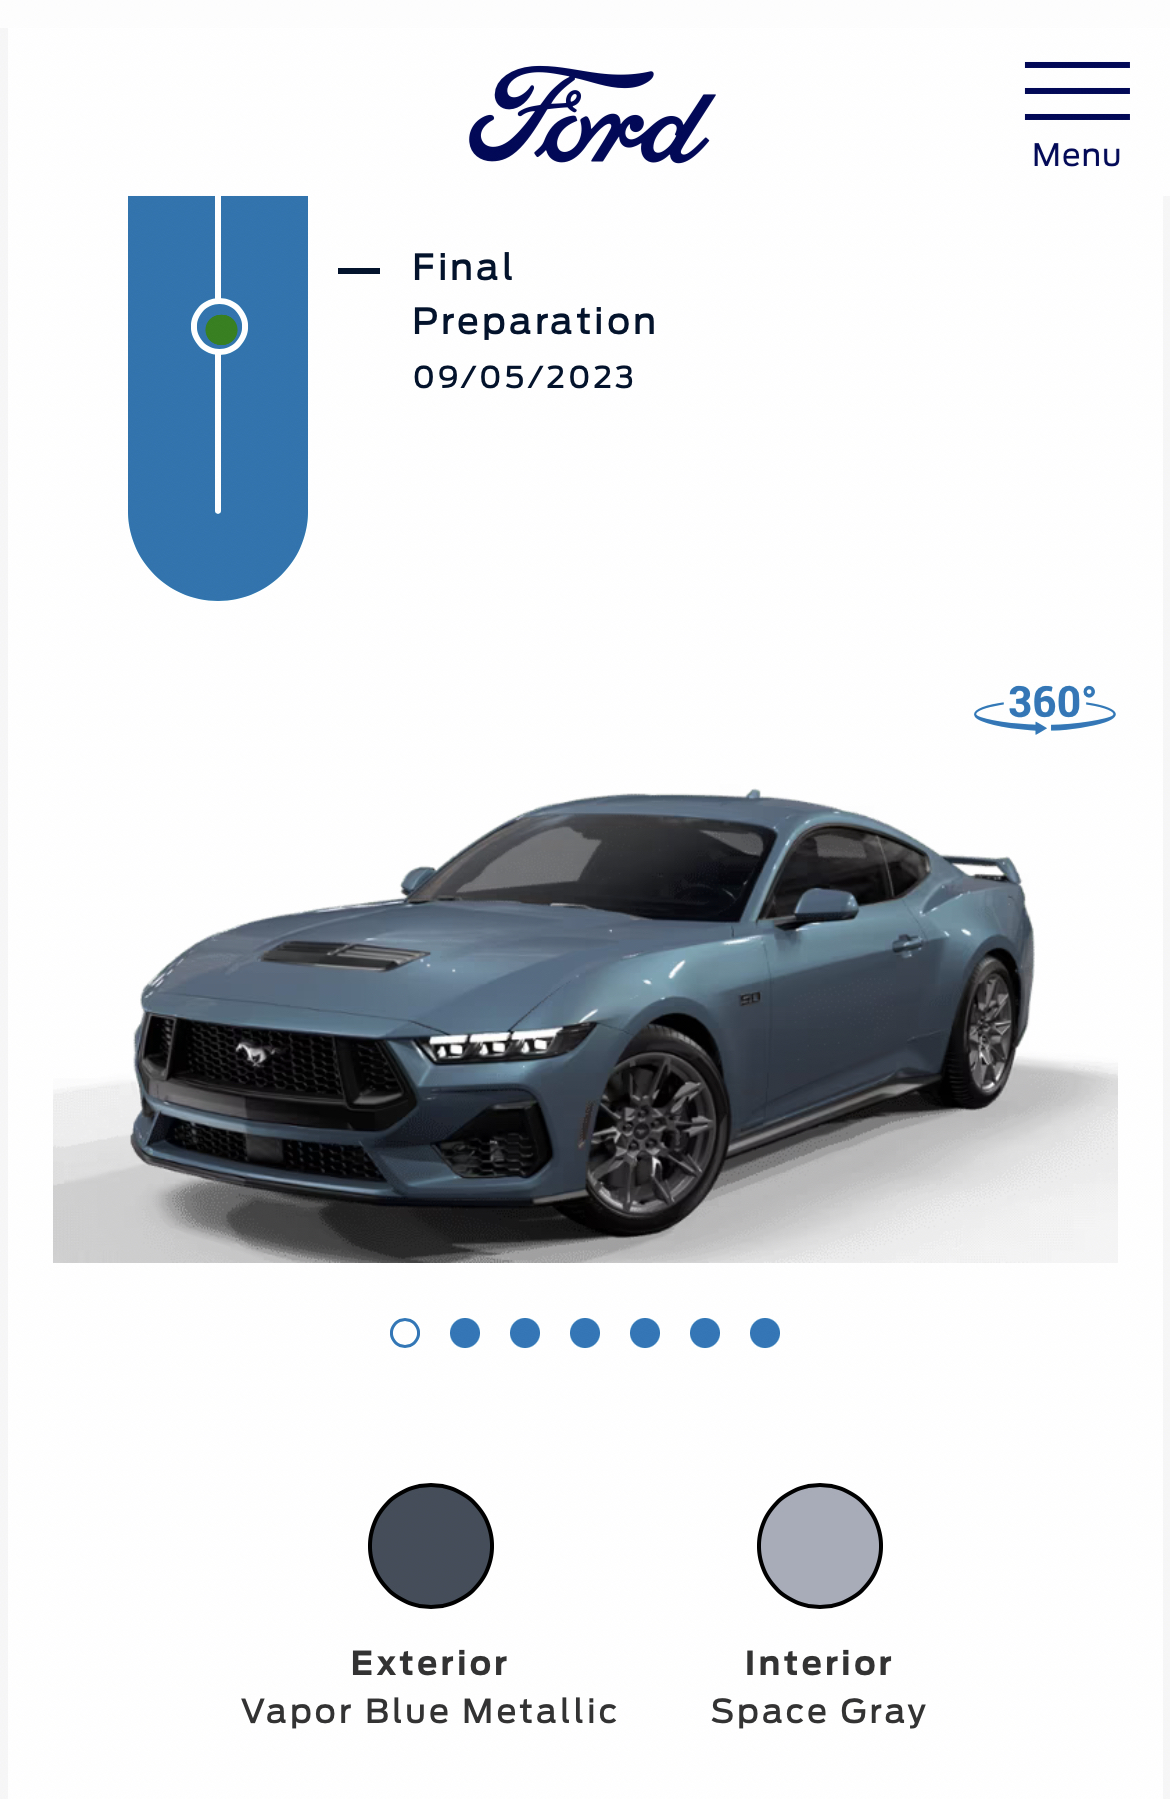 S650 Mustang BUILT & SHIPPED !! Tracker update 2023: What's your status? IMG_8354